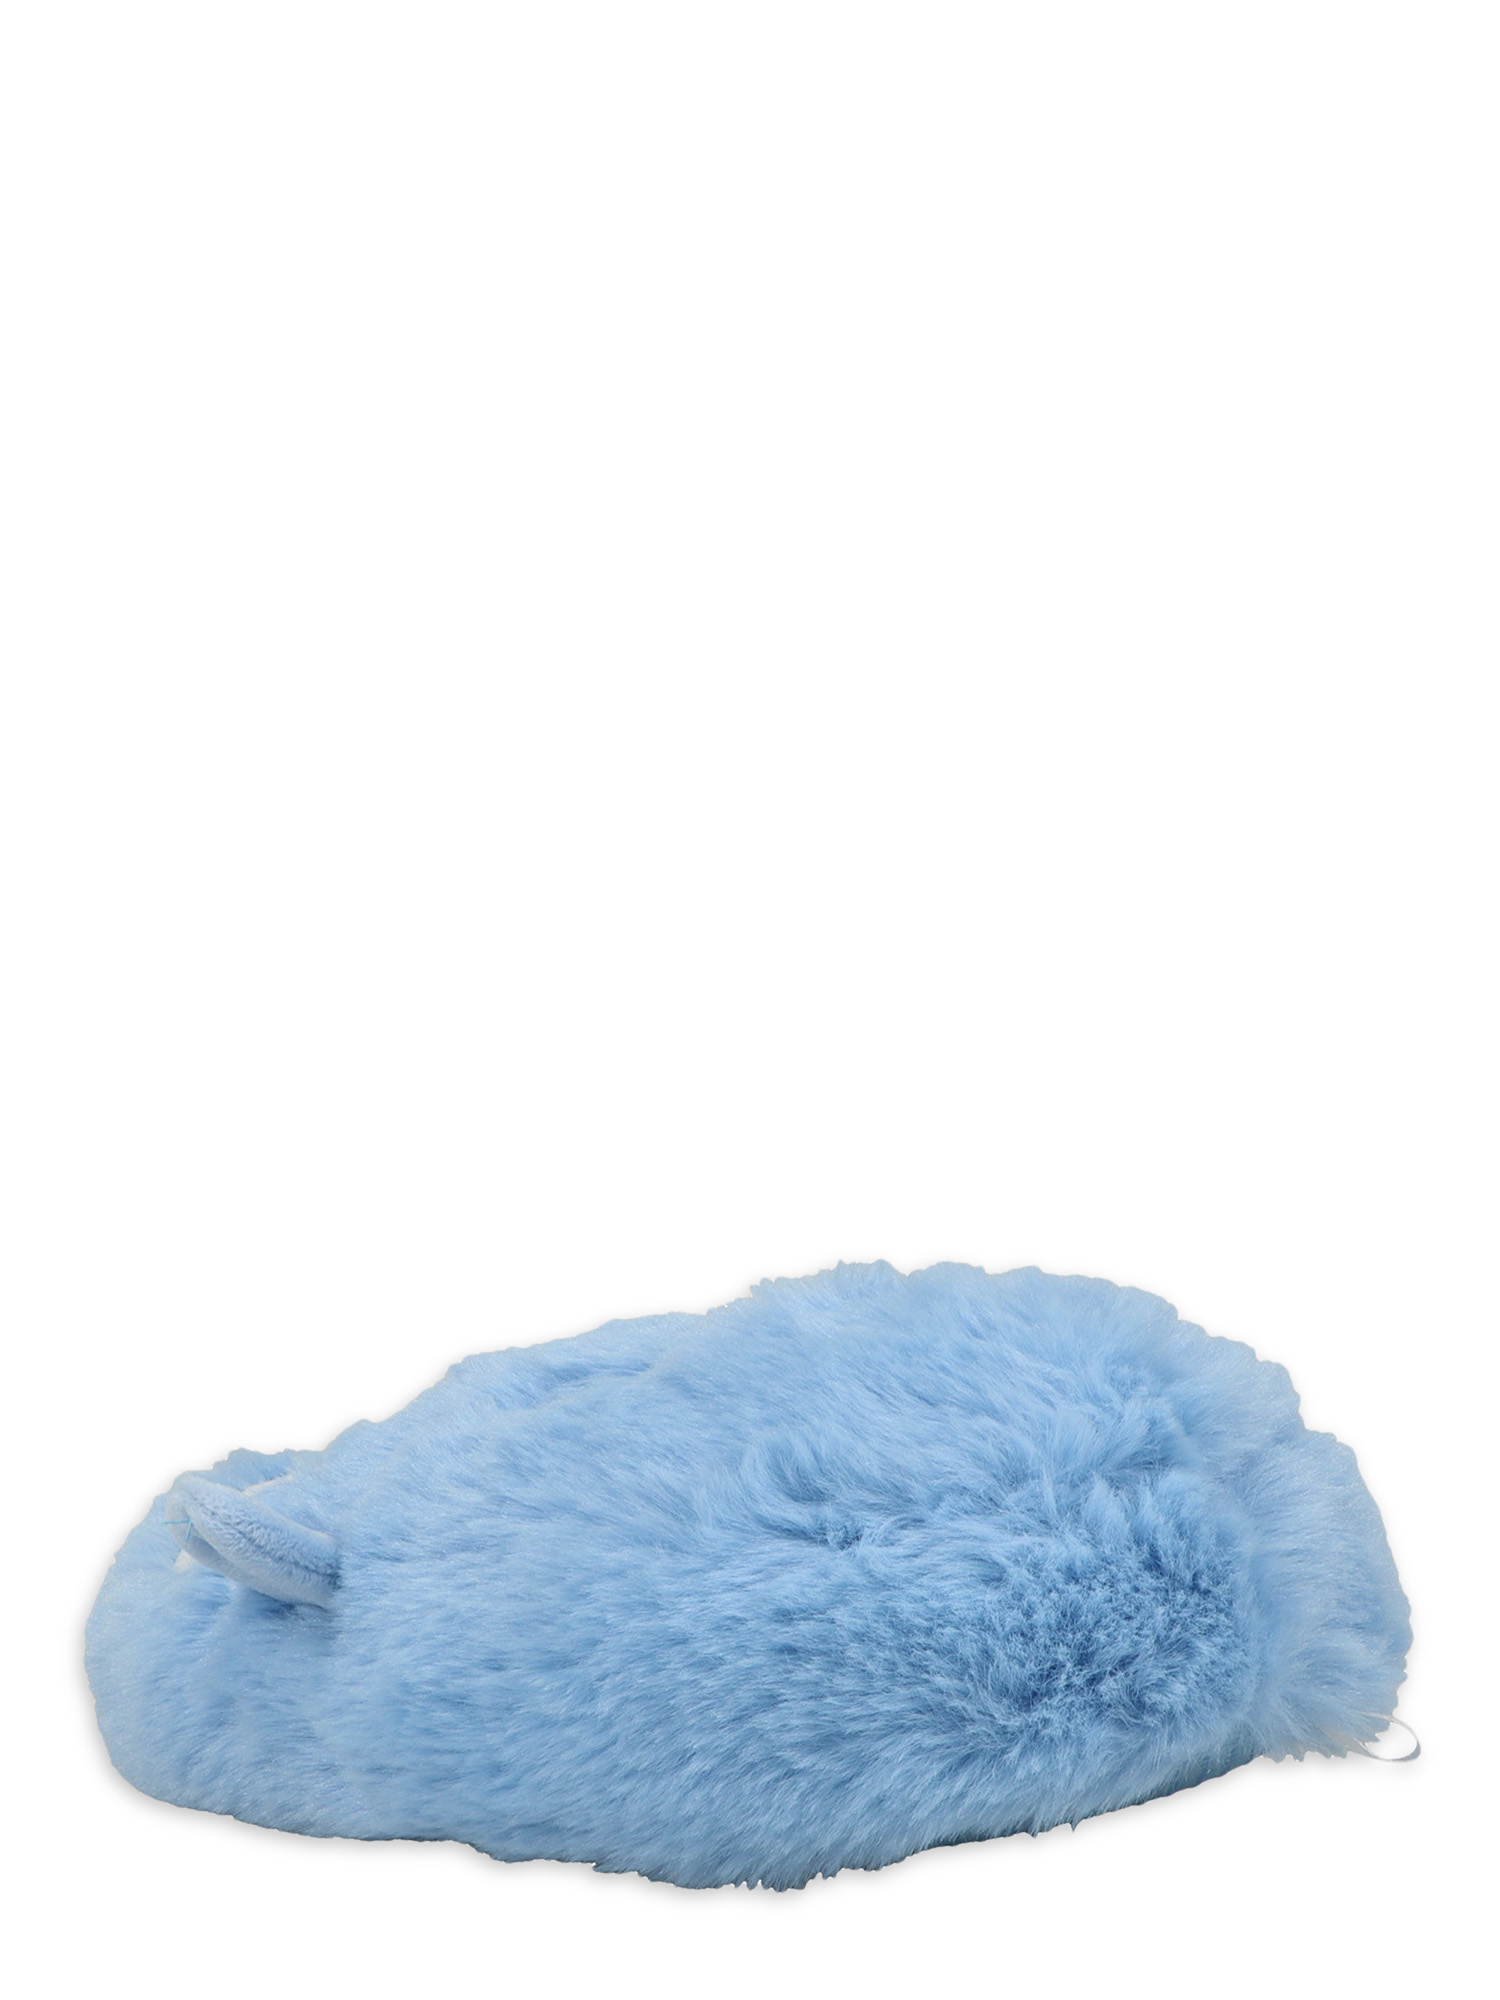 Squishmallows Toddler & Kids Harvey the Walrus Slippers - image 5 of 5